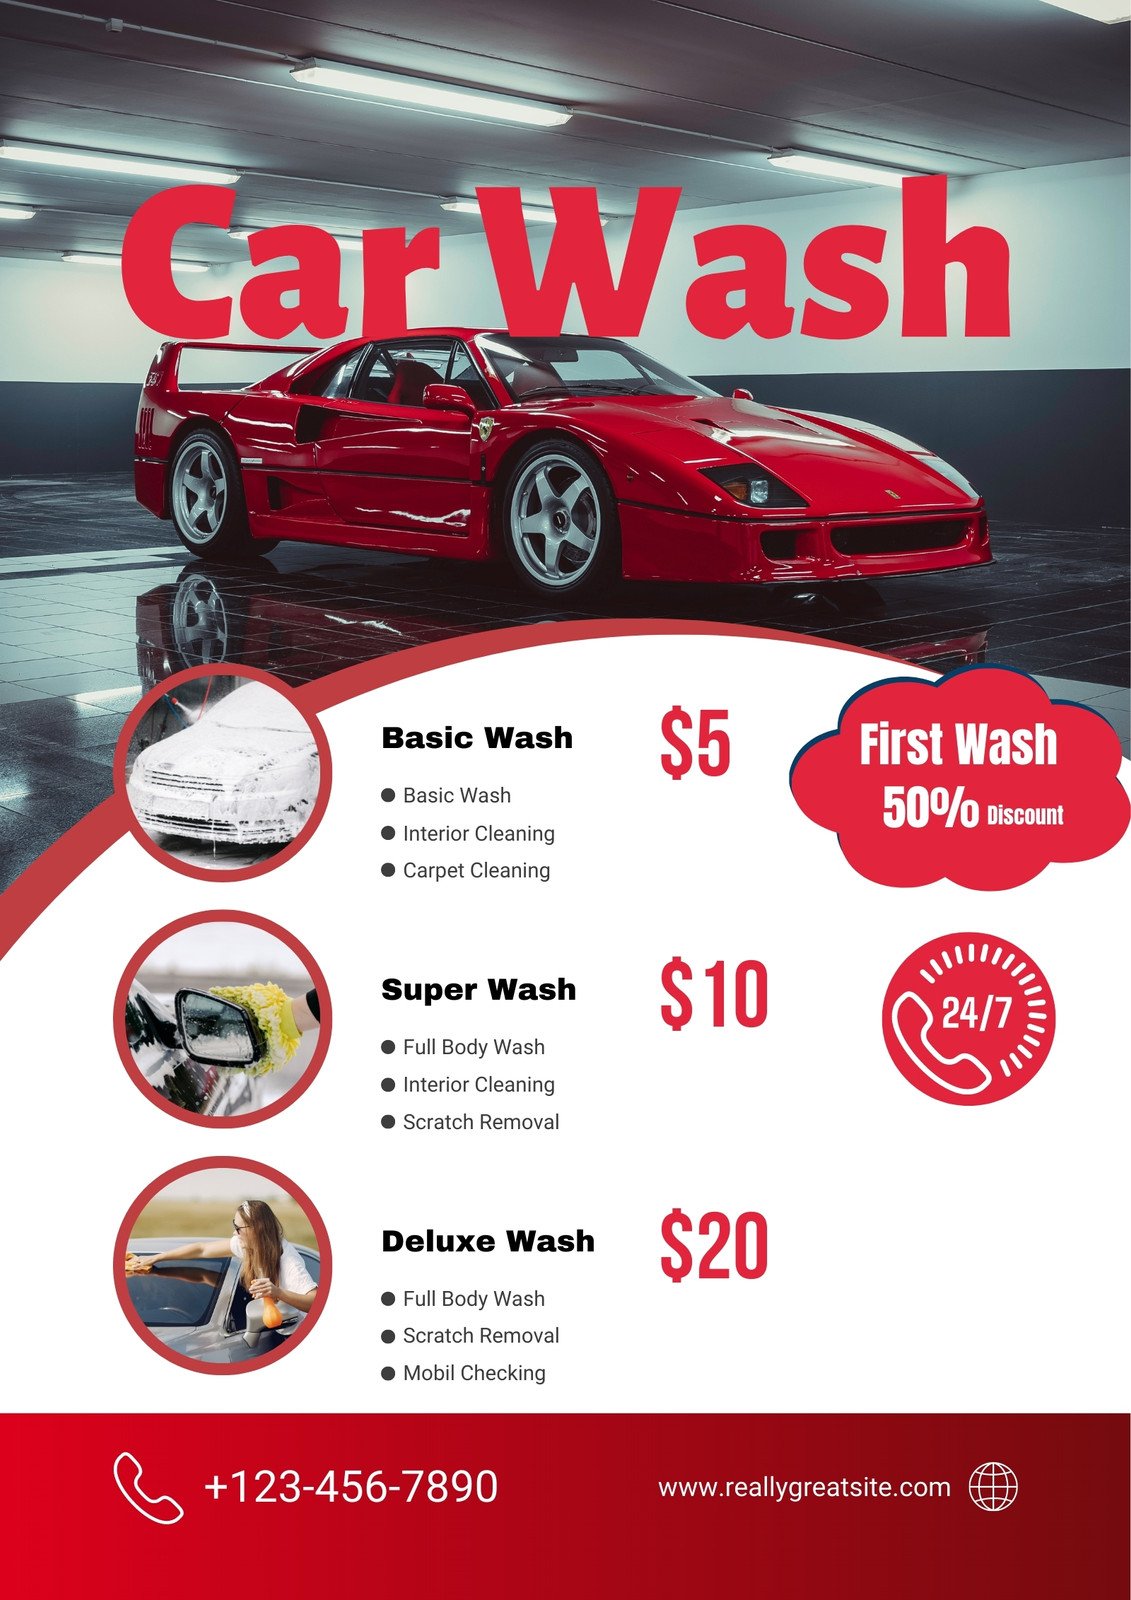 free-printable-customizable-car-wash-flyer-templates-58-off